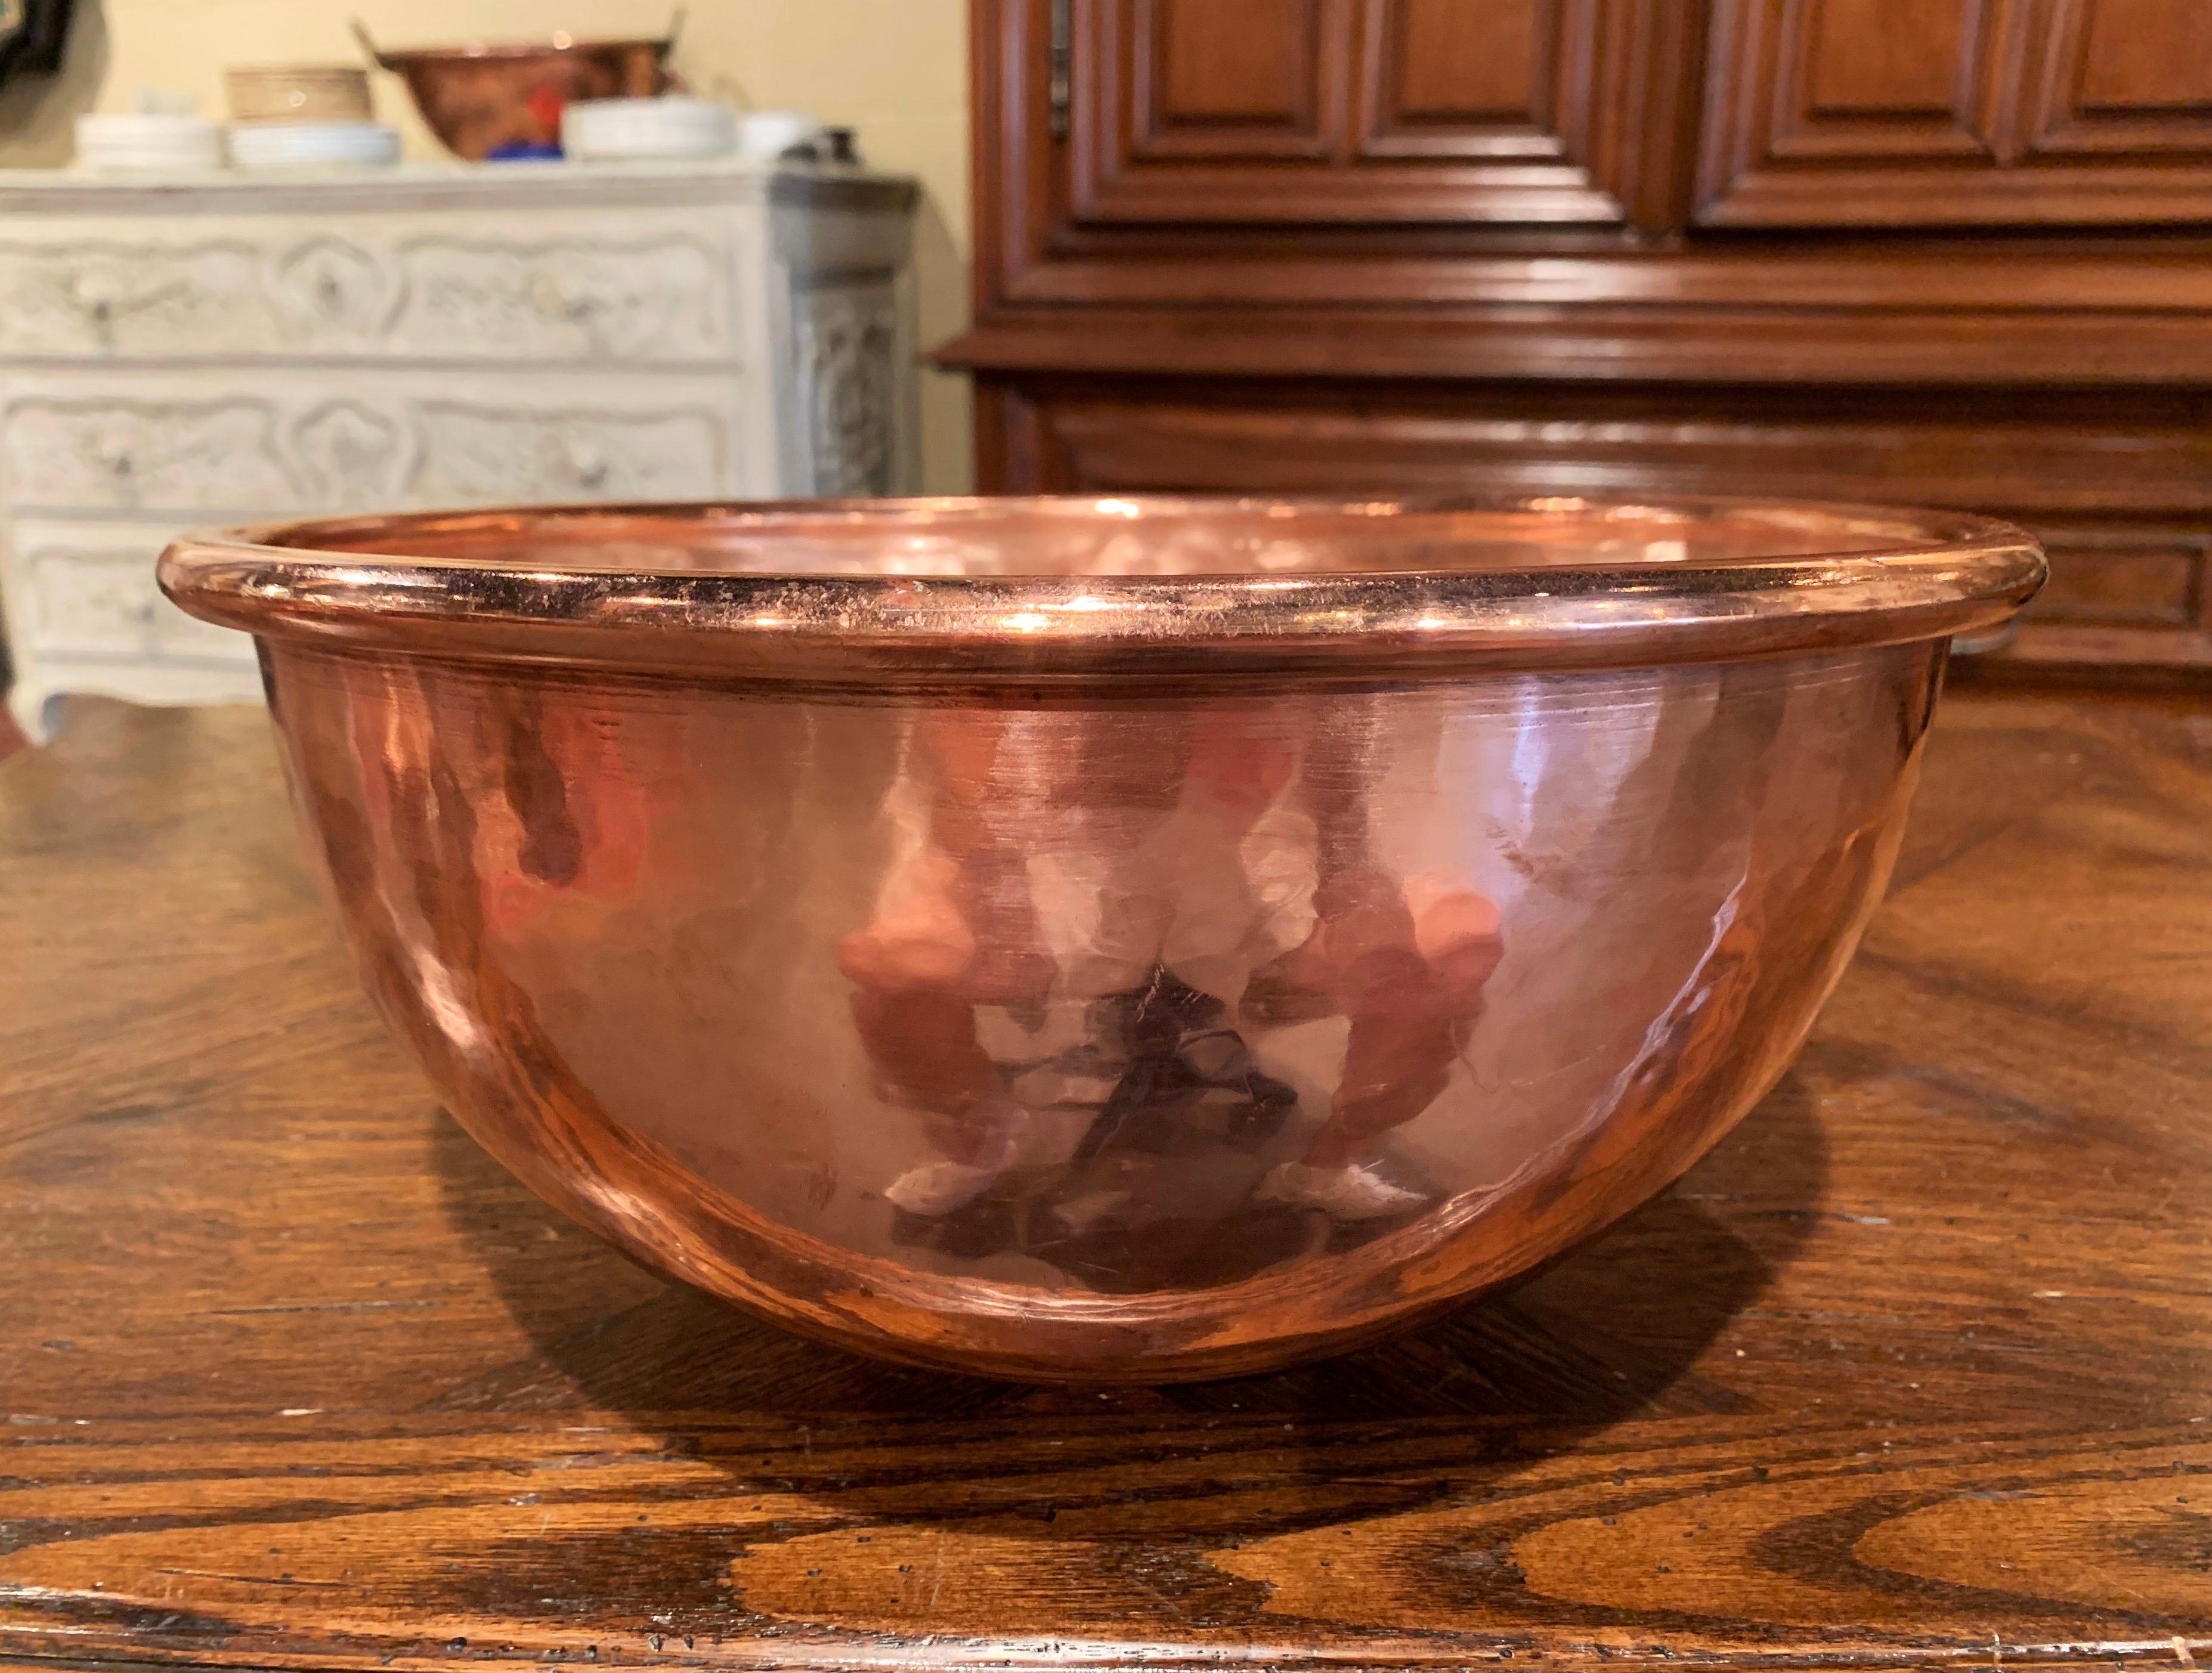 Keep your wine chilled in style with this elegant round bowl, crafted in Northern France circa 1870 and originally used for home made jelly, the circular copper bowl with rounded rim is decorated with a small round side handle attached with rivets.